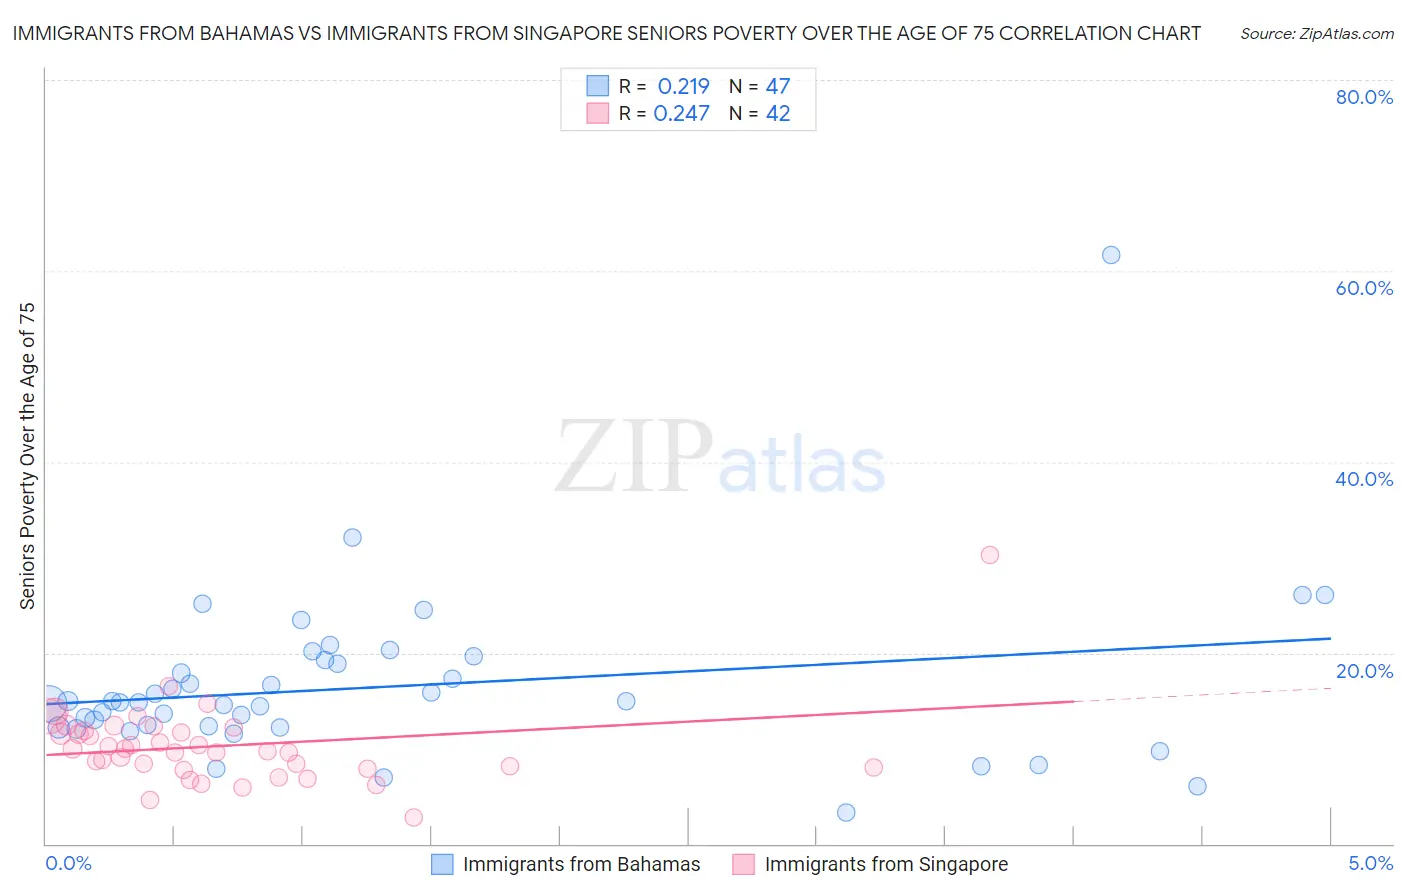 Immigrants from Bahamas vs Immigrants from Singapore Seniors Poverty Over the Age of 75